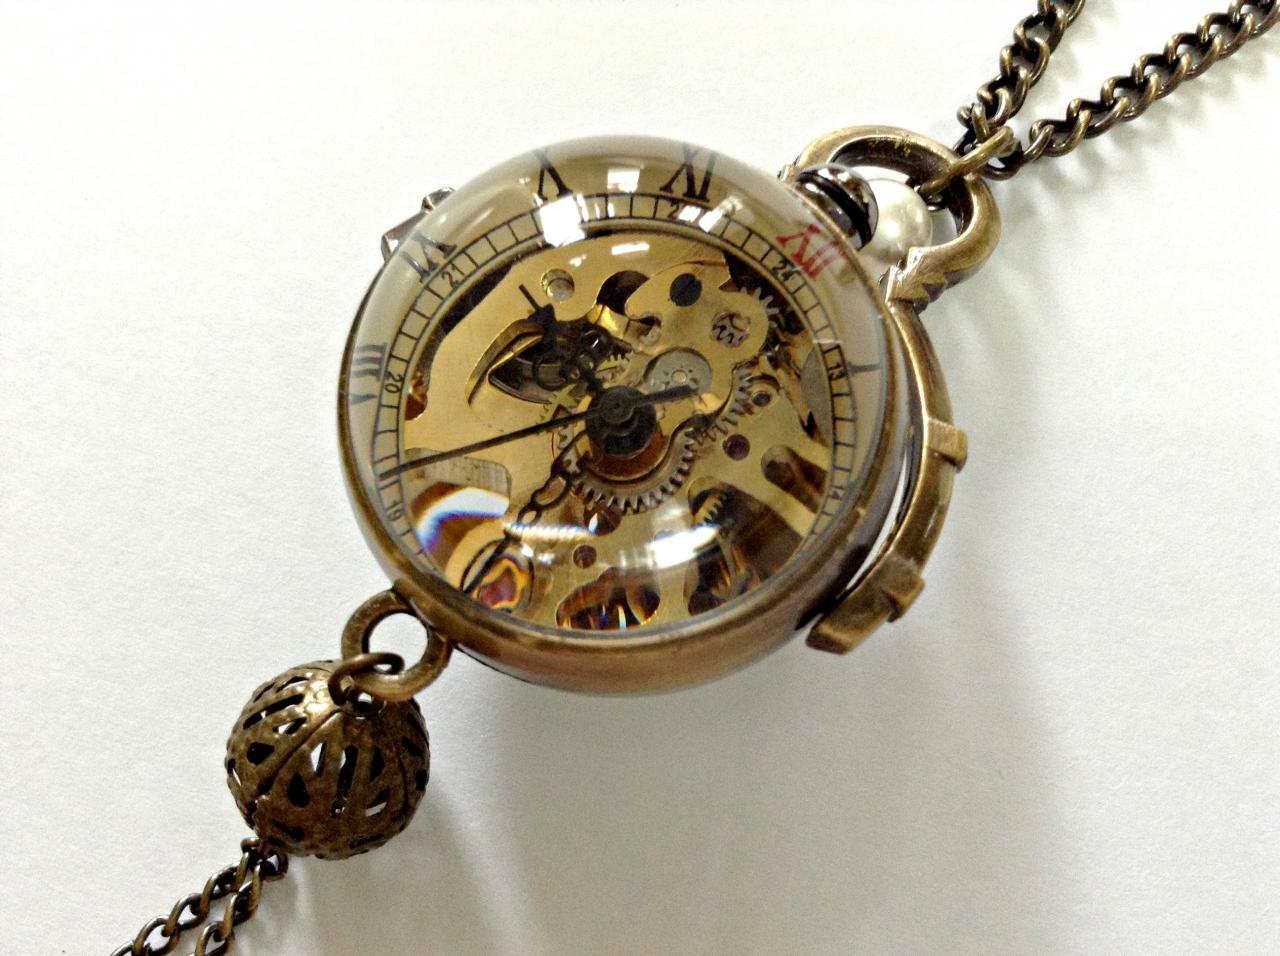 Handmade Vintage Crystal Ball Mechanical Pocket Watch Necklace With Pearl Pendant